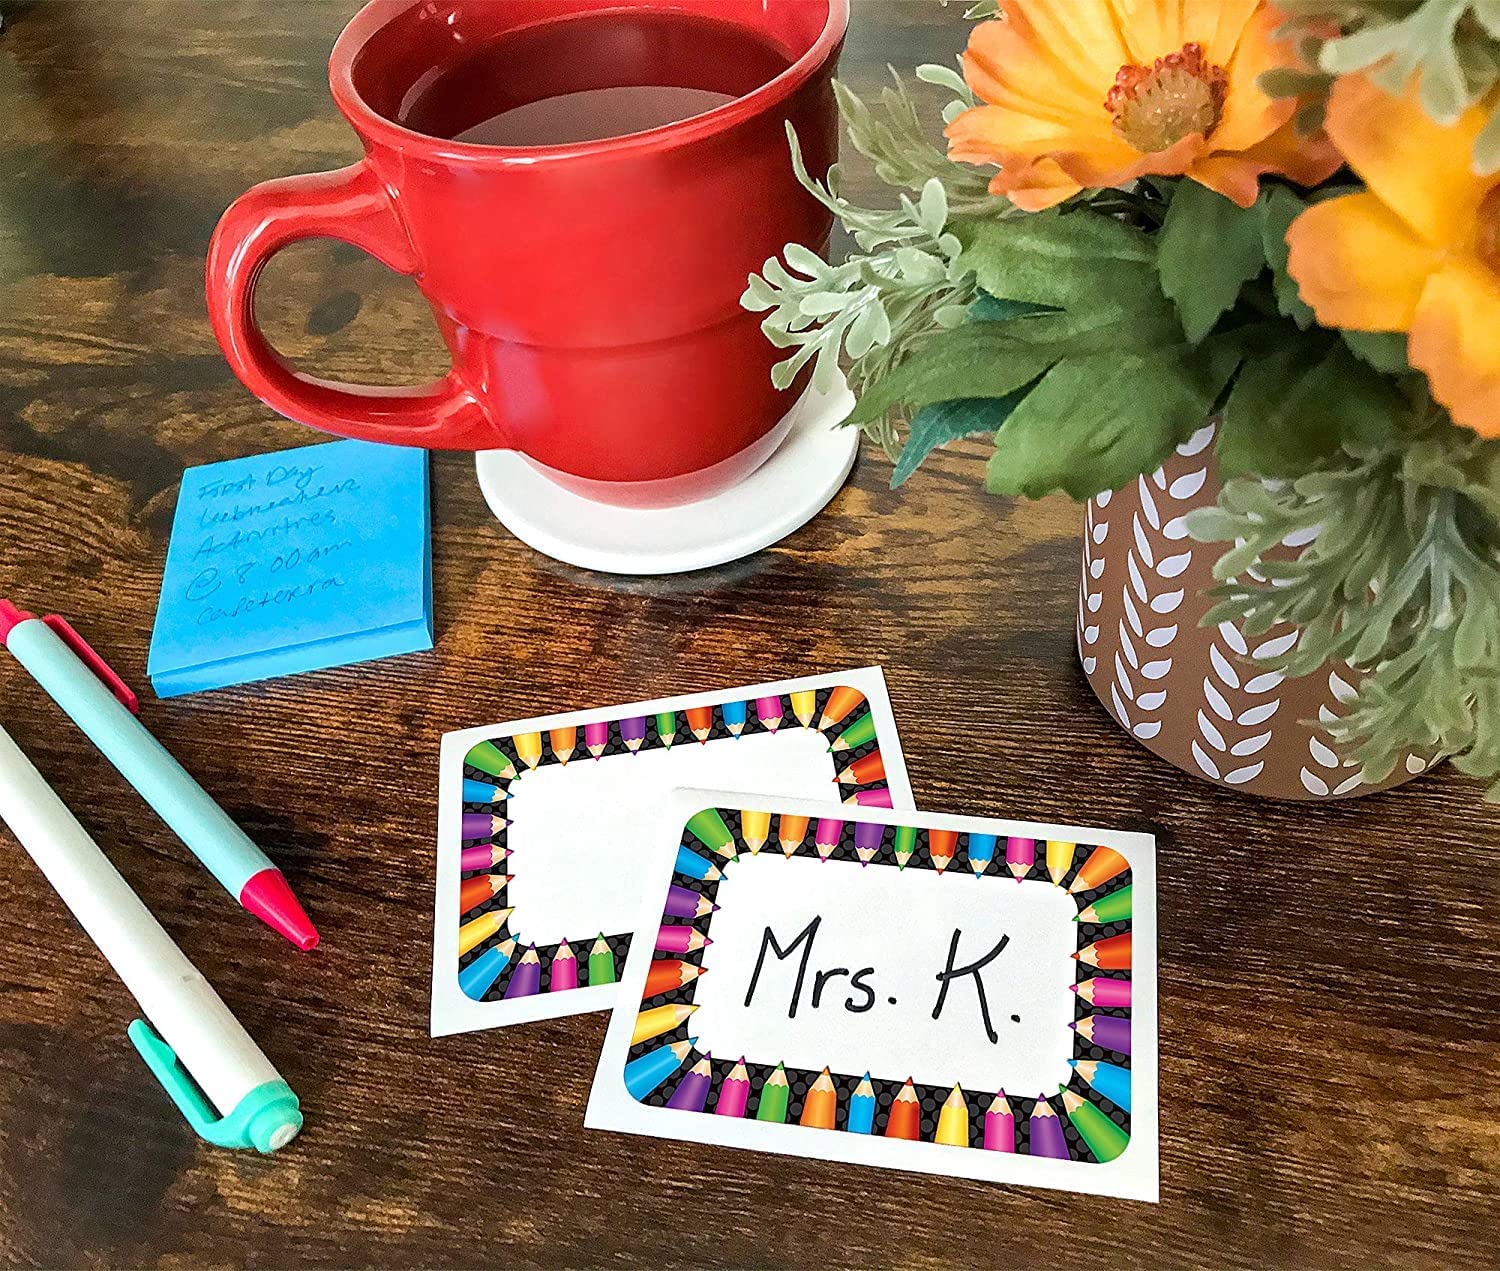 Name tag card stickers for writing names, designed in the shapes of wooden pencils